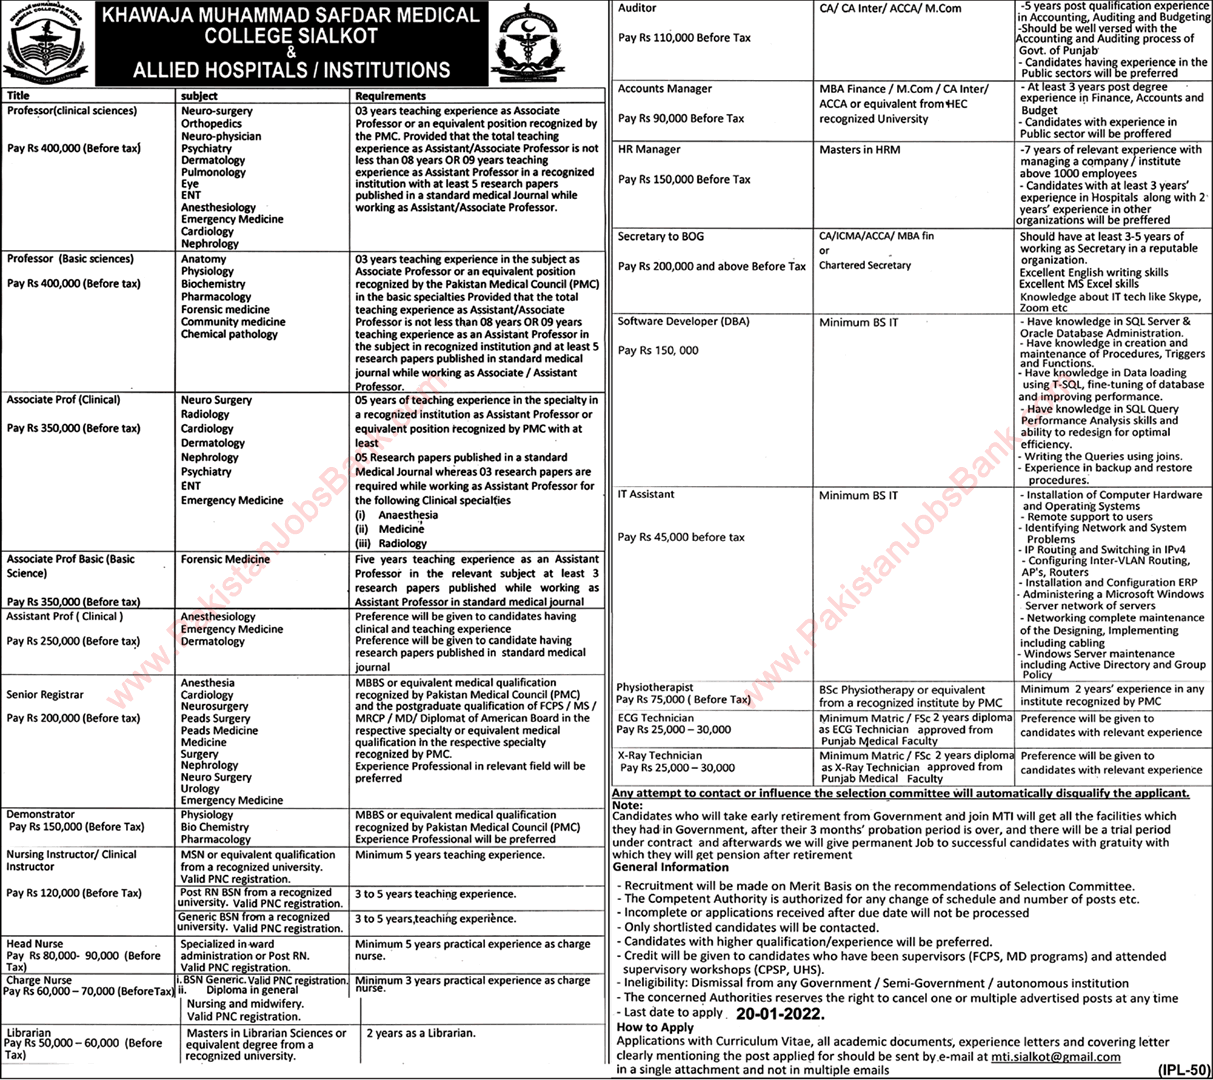 Khawaja Muhammad Safdar Medical College Sialkot Jobs 2022 Teaching Faculty & Others Allied Hospital / Institutions Latest